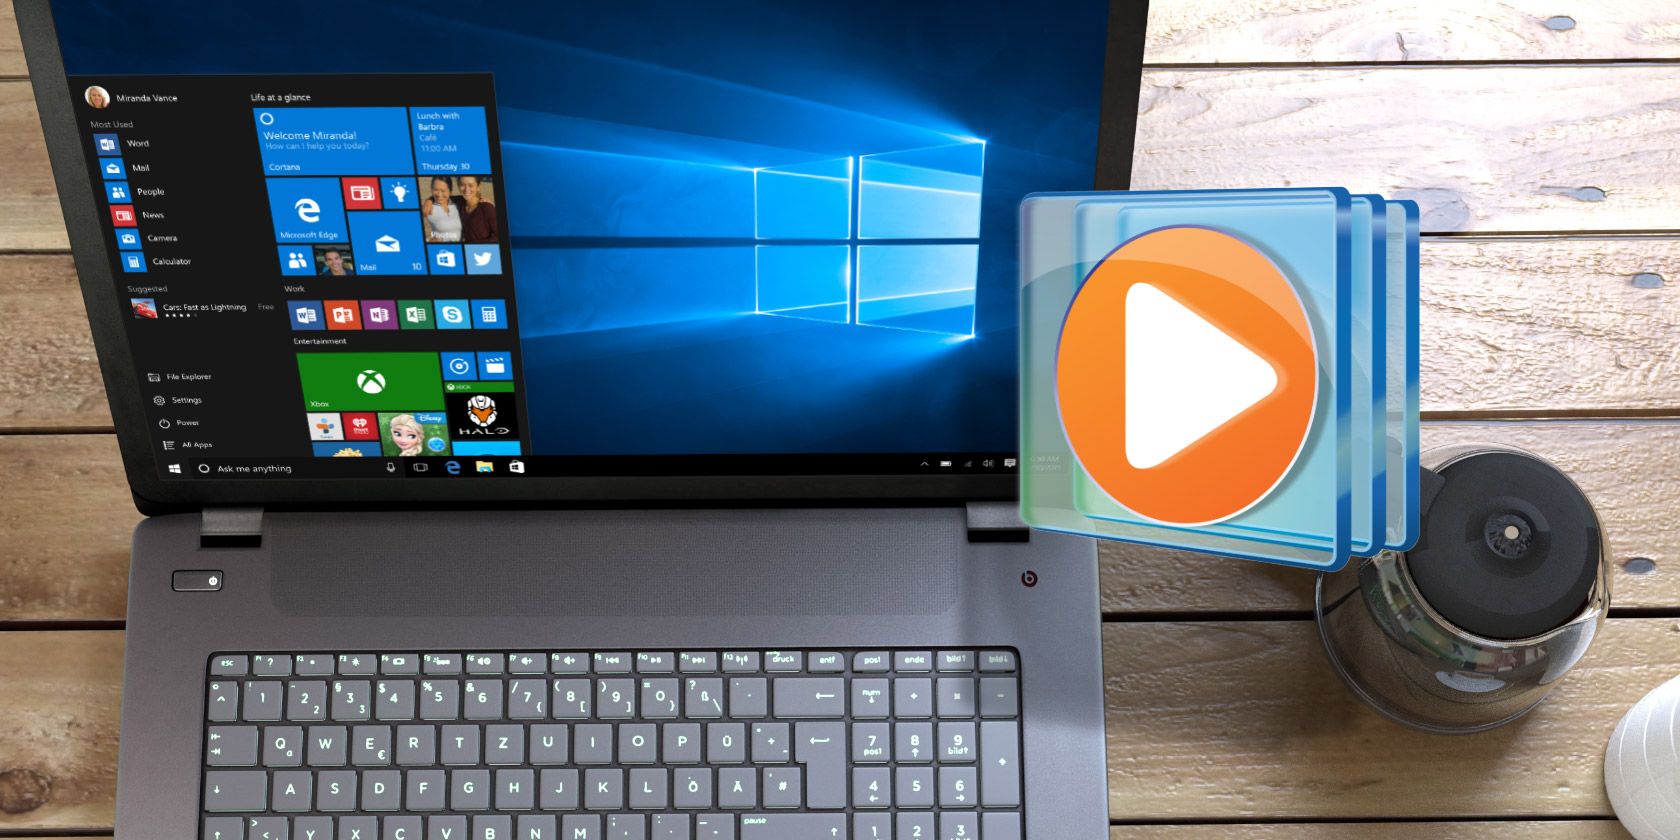 How to Download Windows Media Player for Windows 10